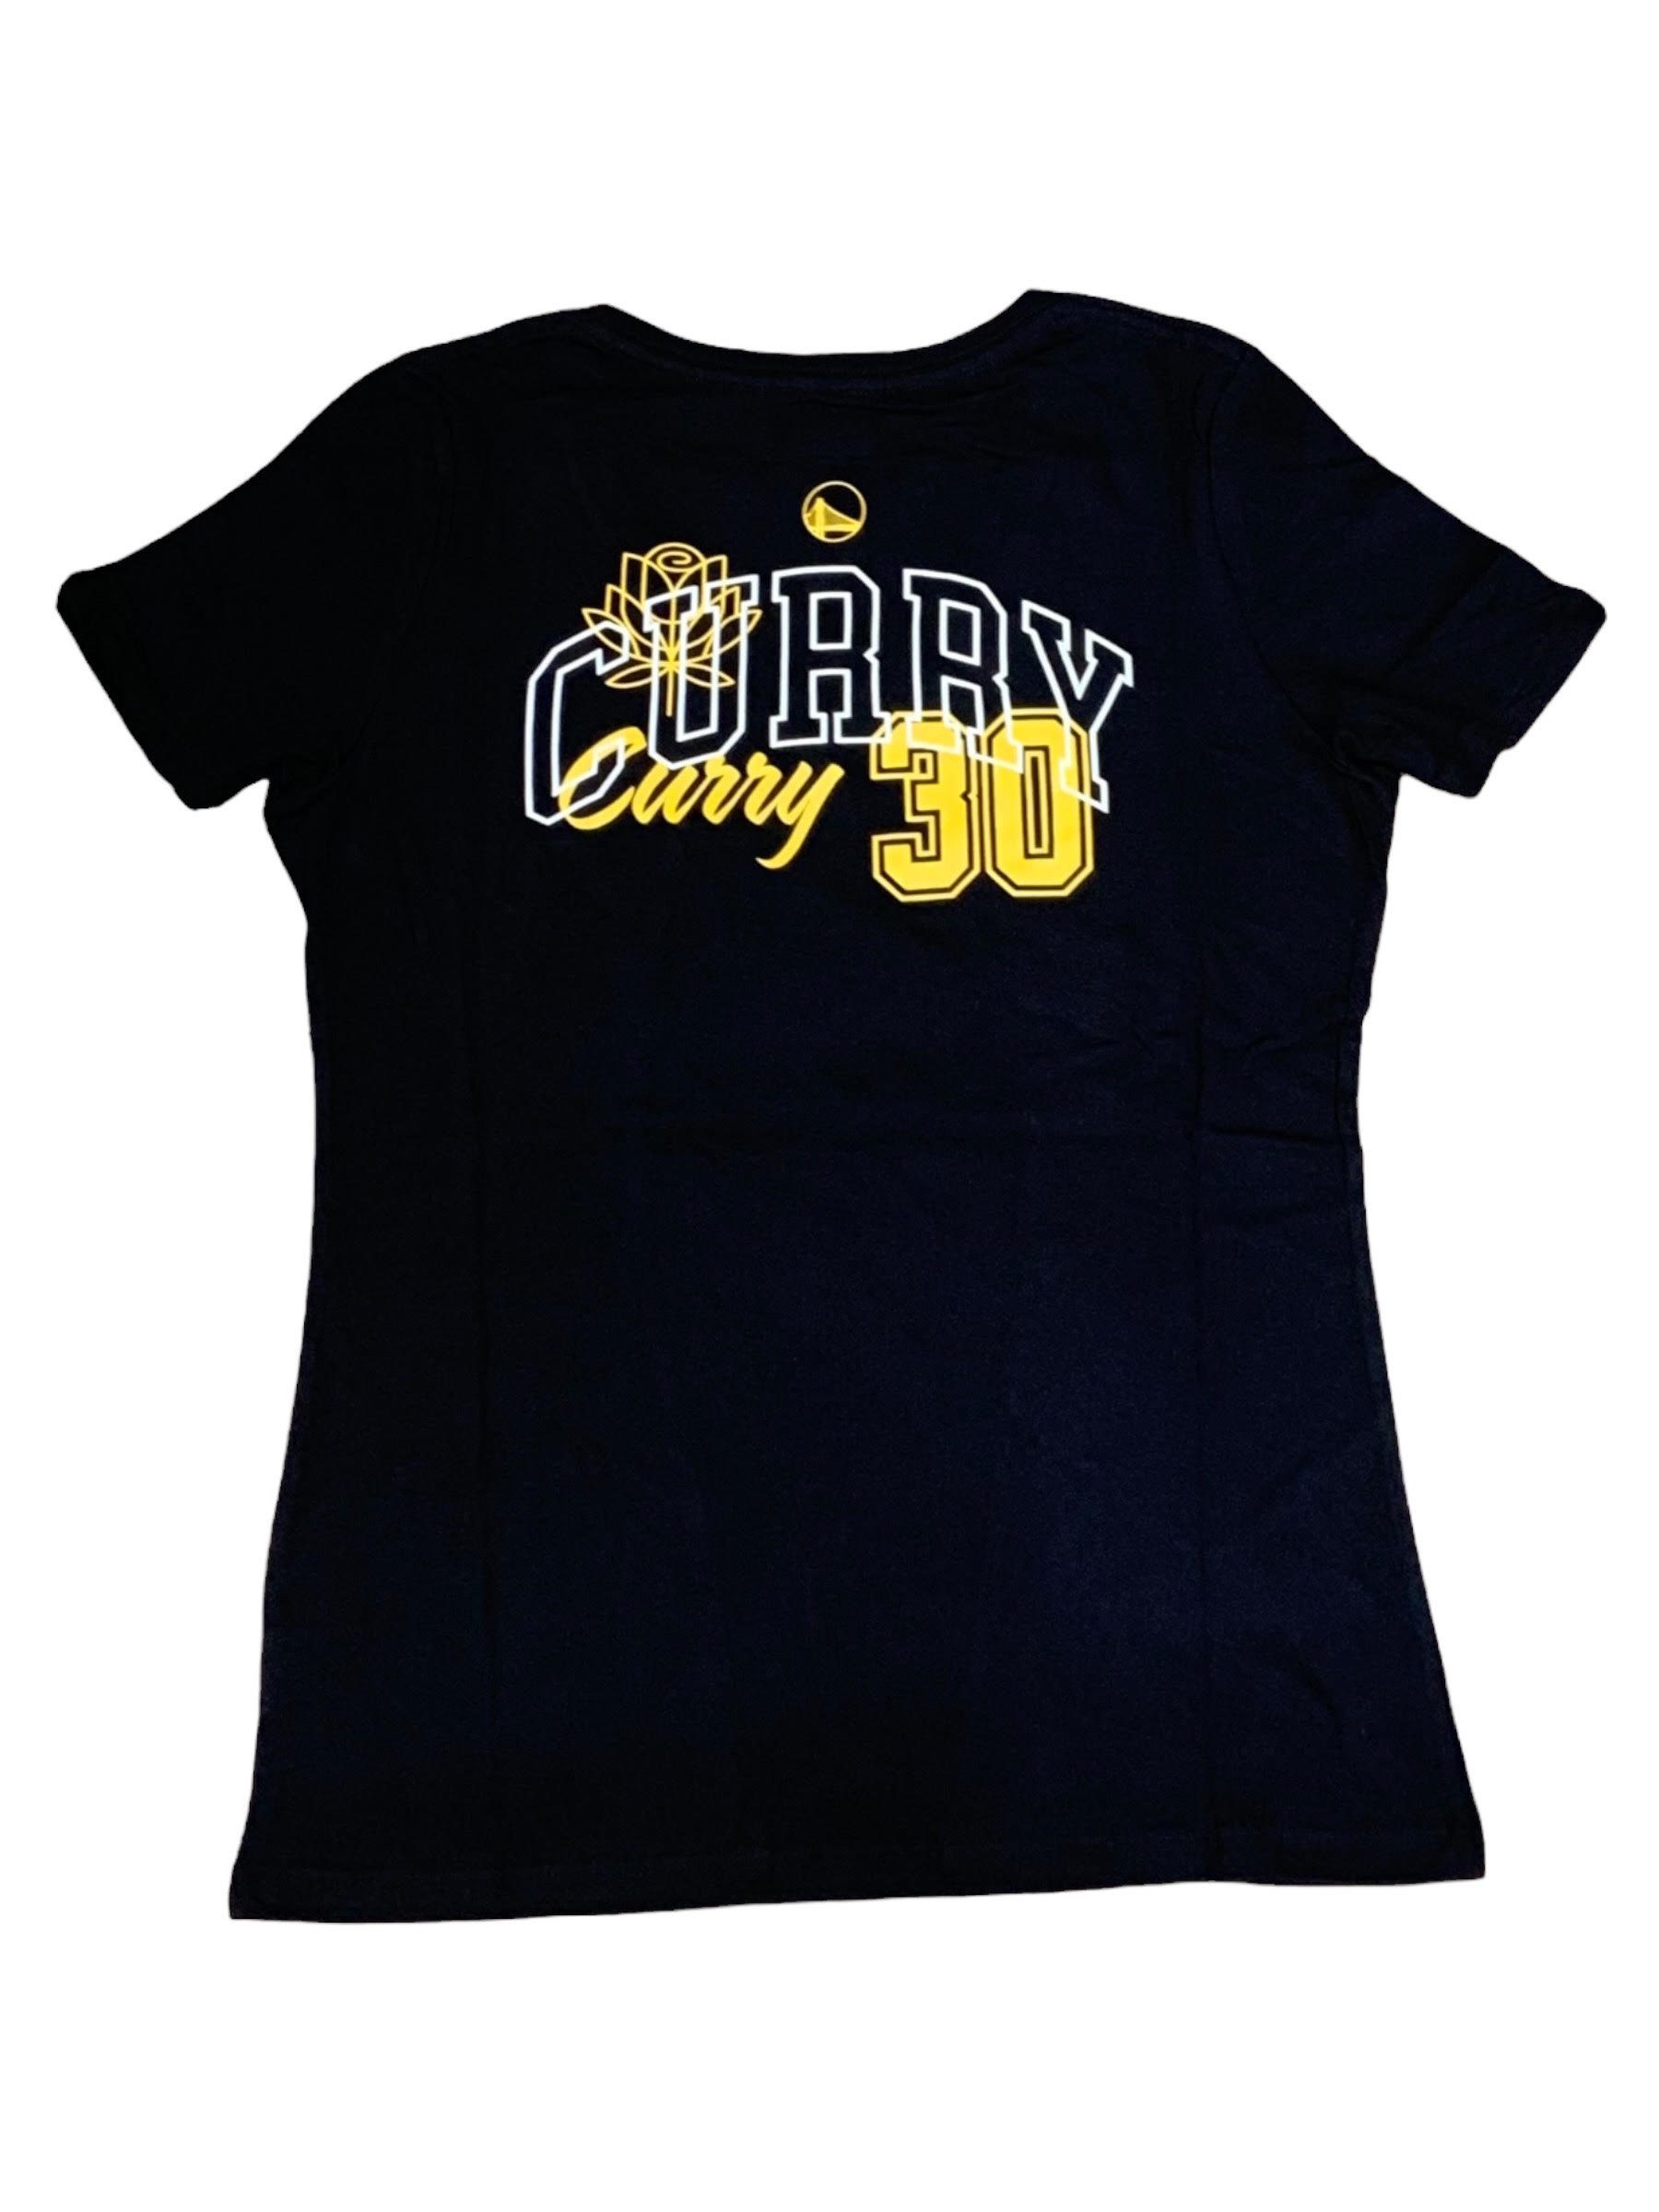 stephen curry jersey woman